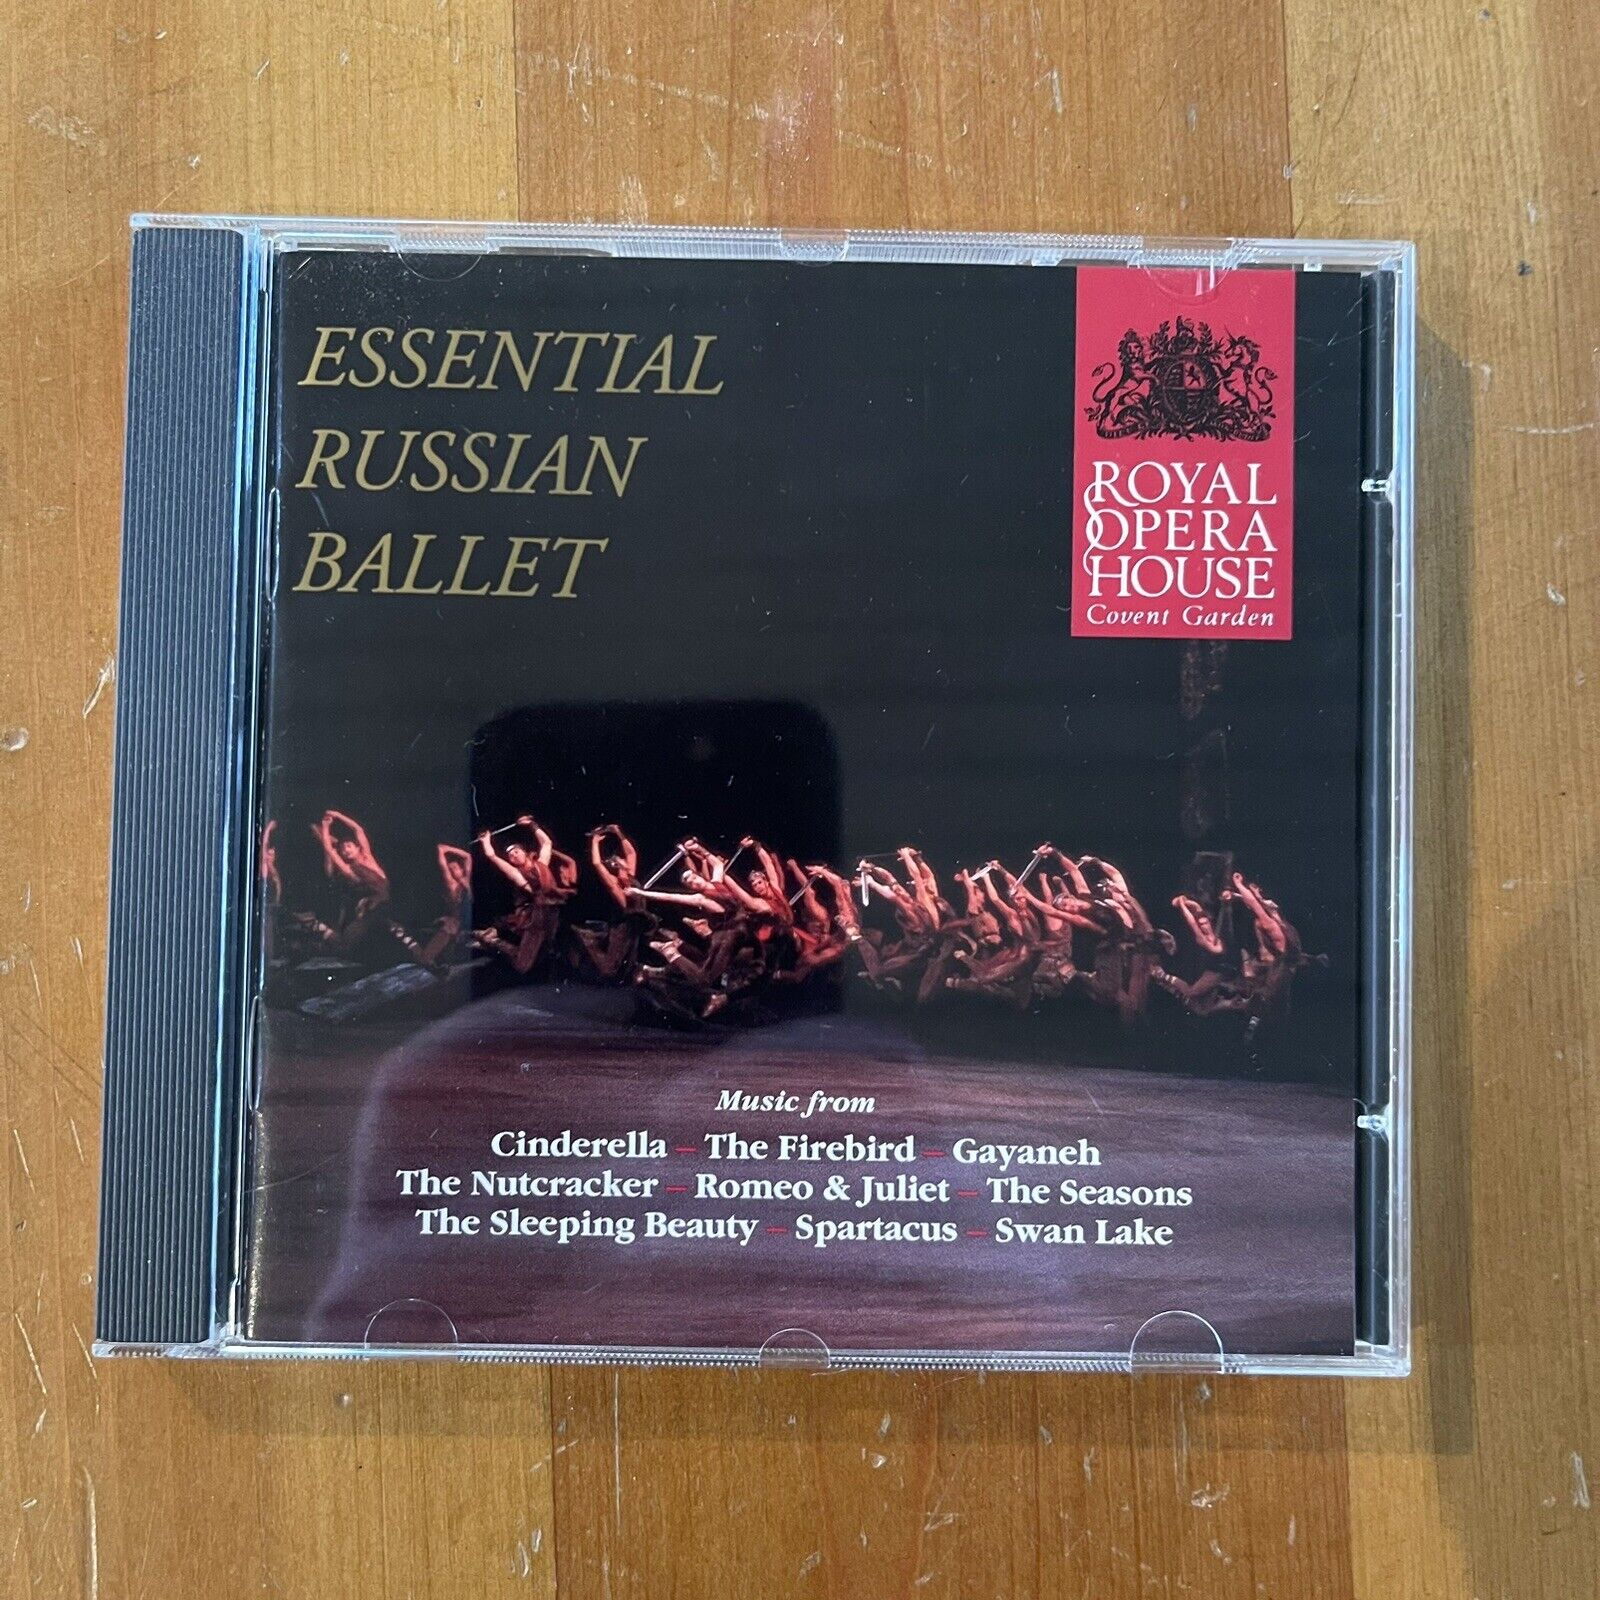 Essential Russian Ballet (CD, Royal Opera House Heritage Series)